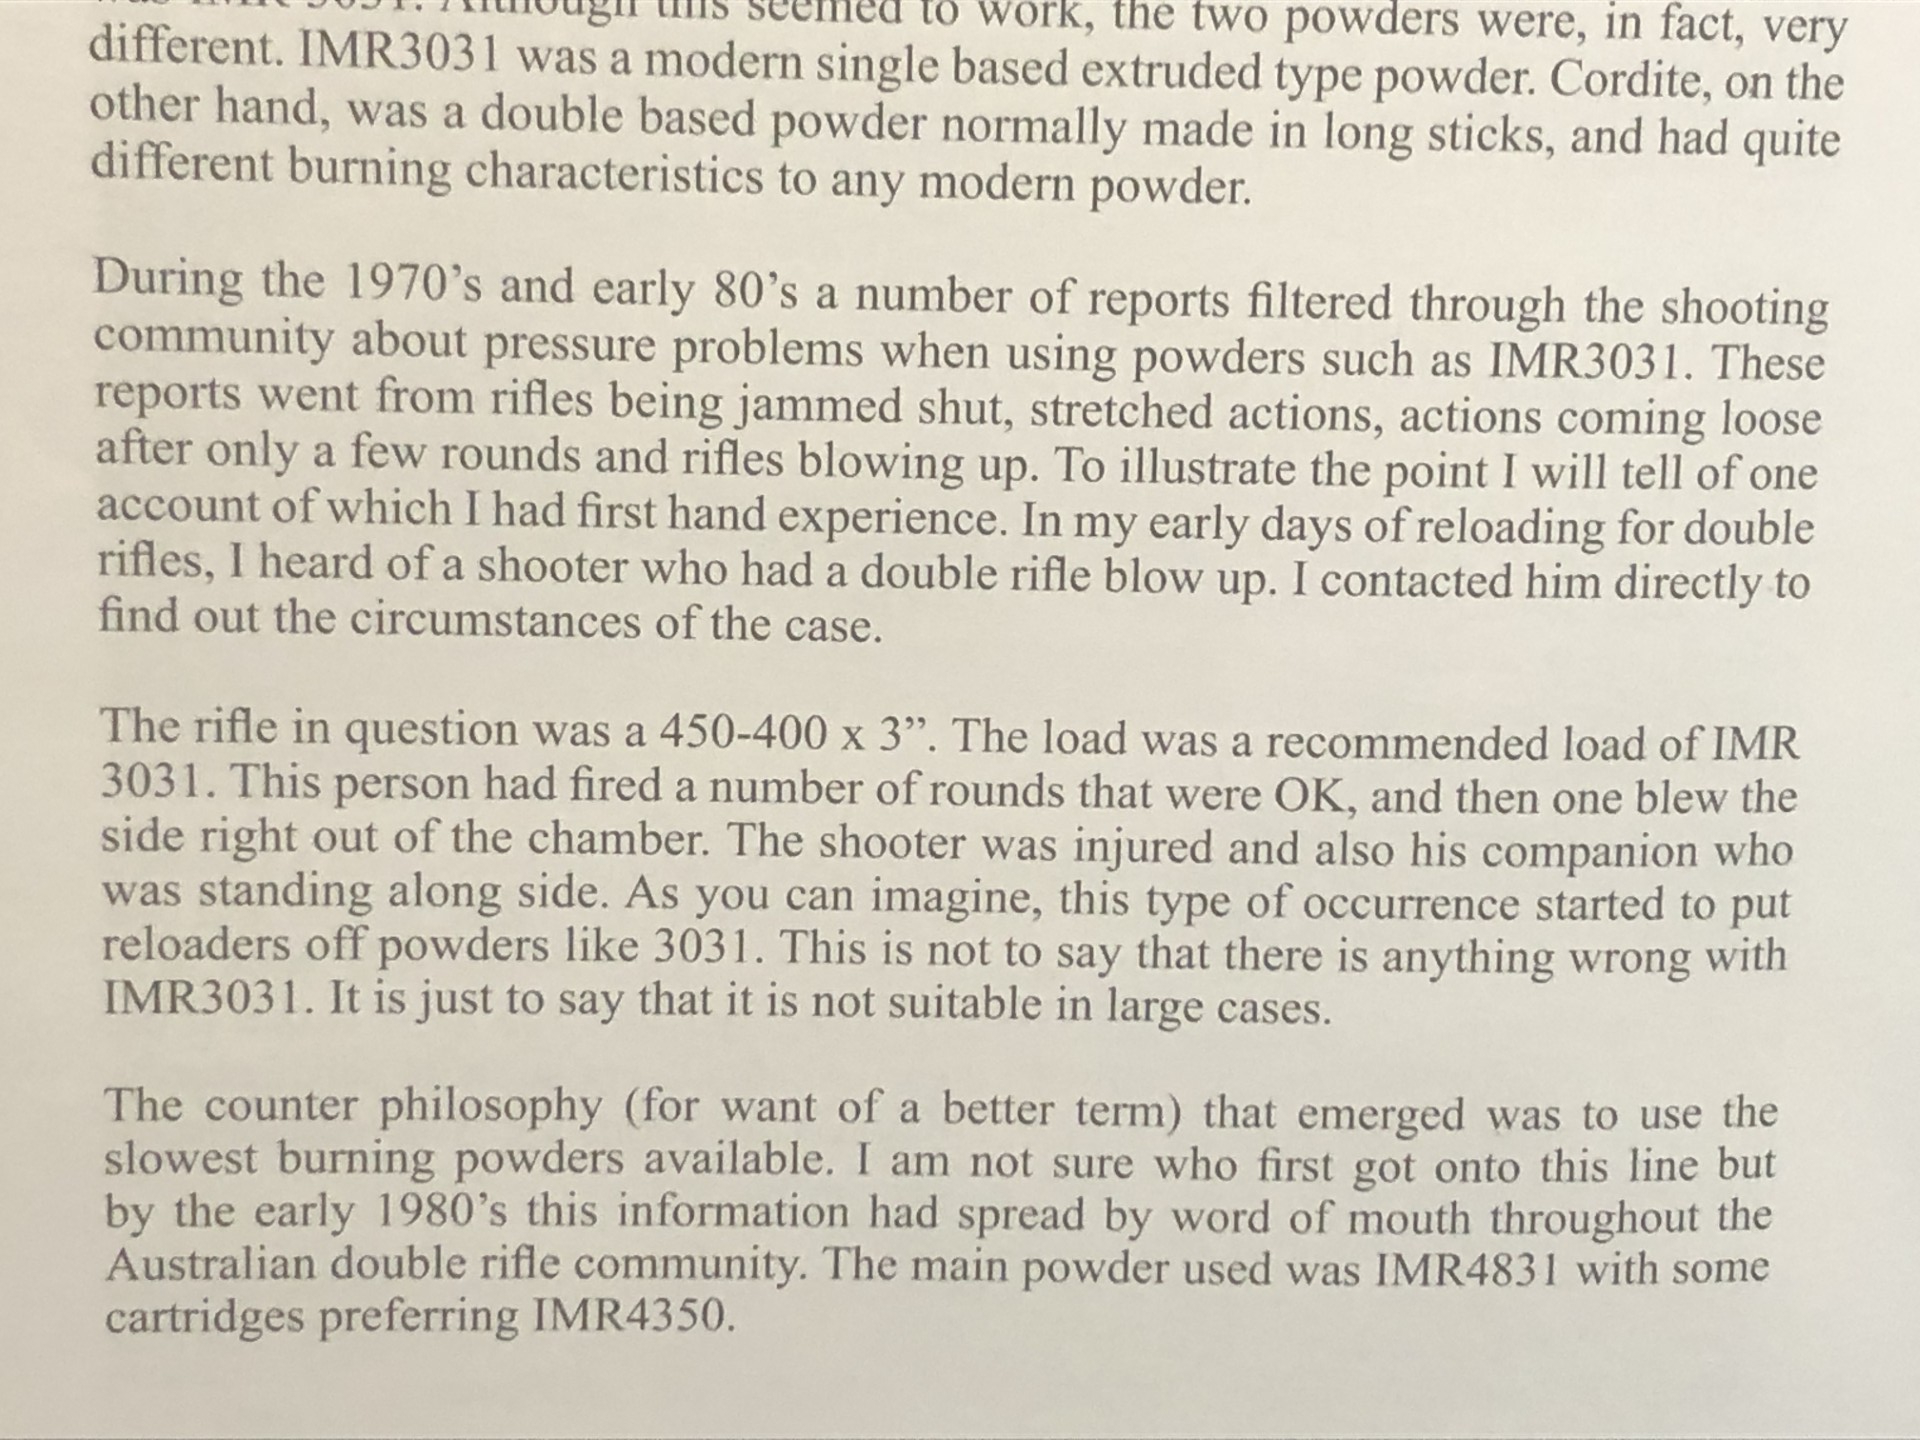 Wright_History of IMR3031.png